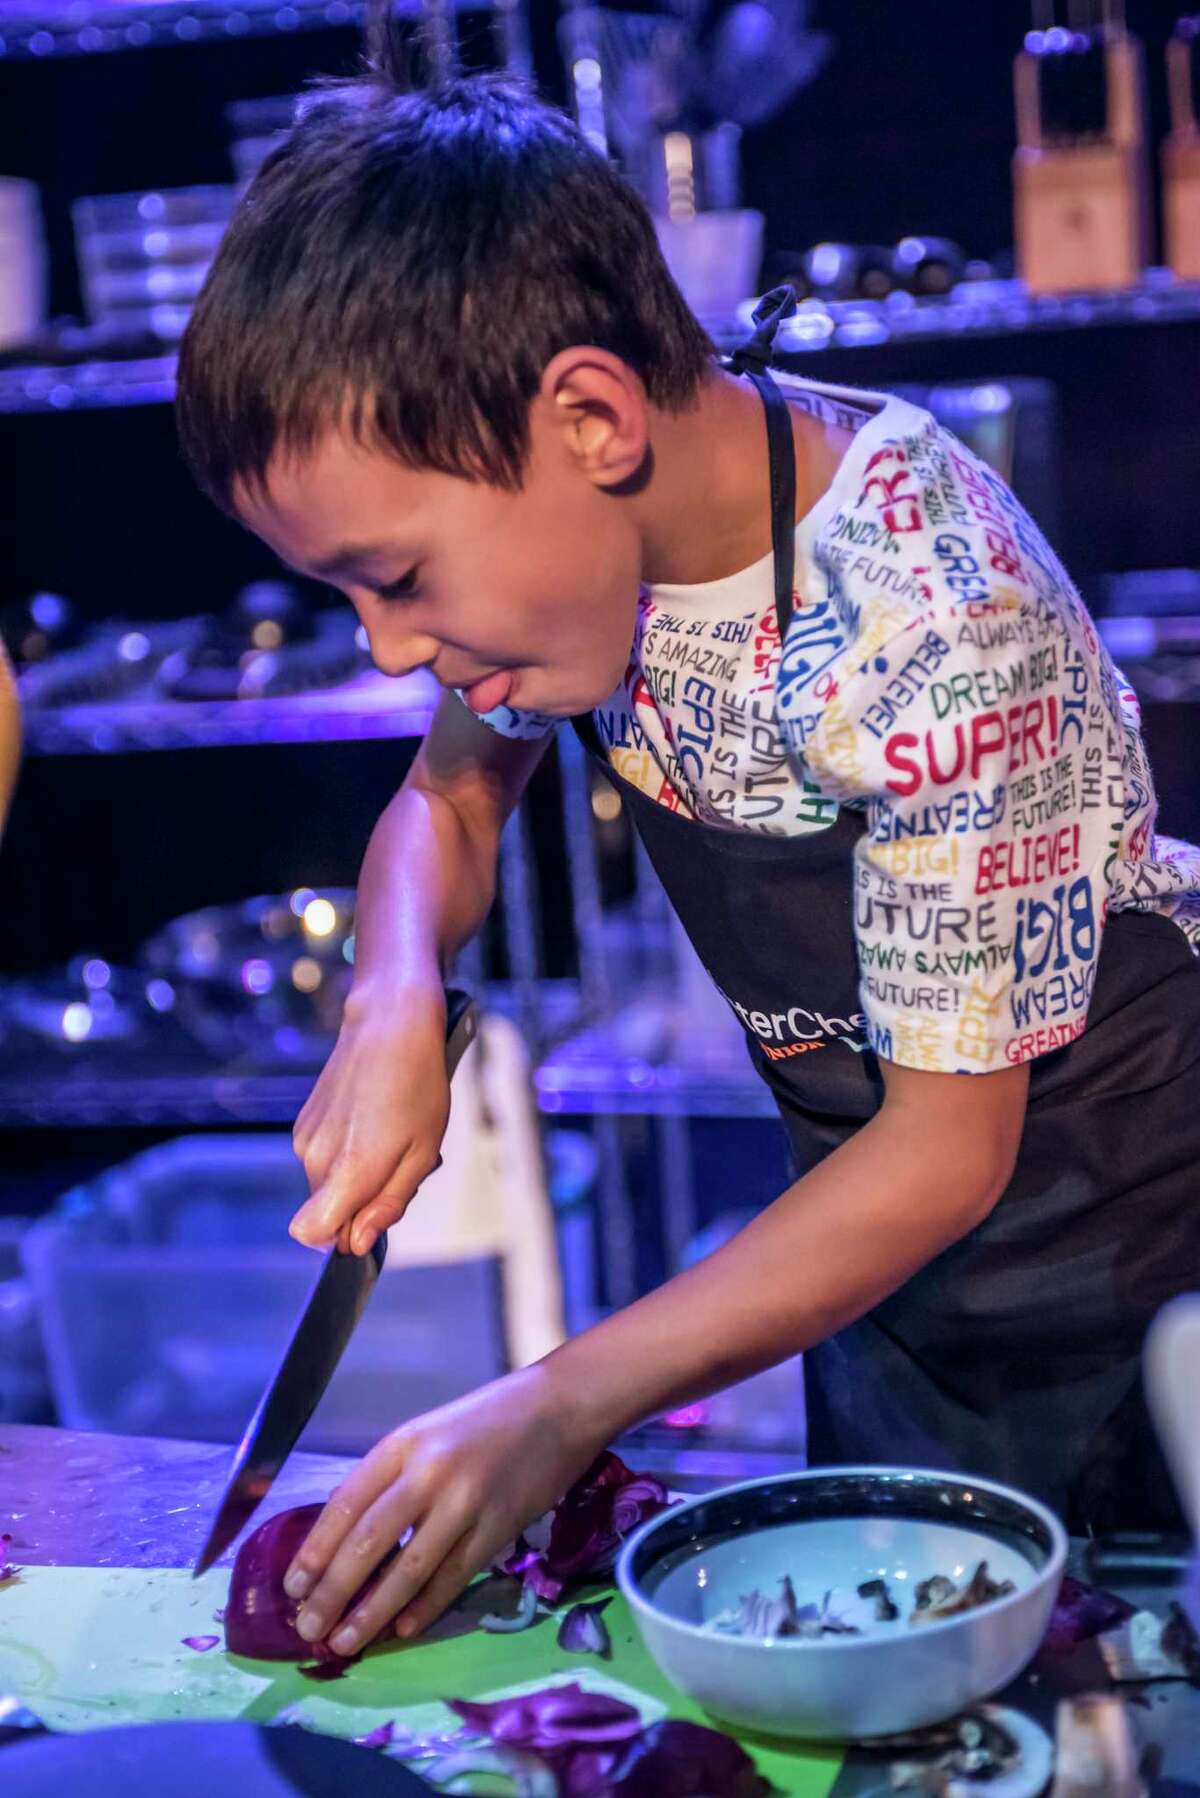 A young cook slices an onion in “MasterChef Jr. Live!”